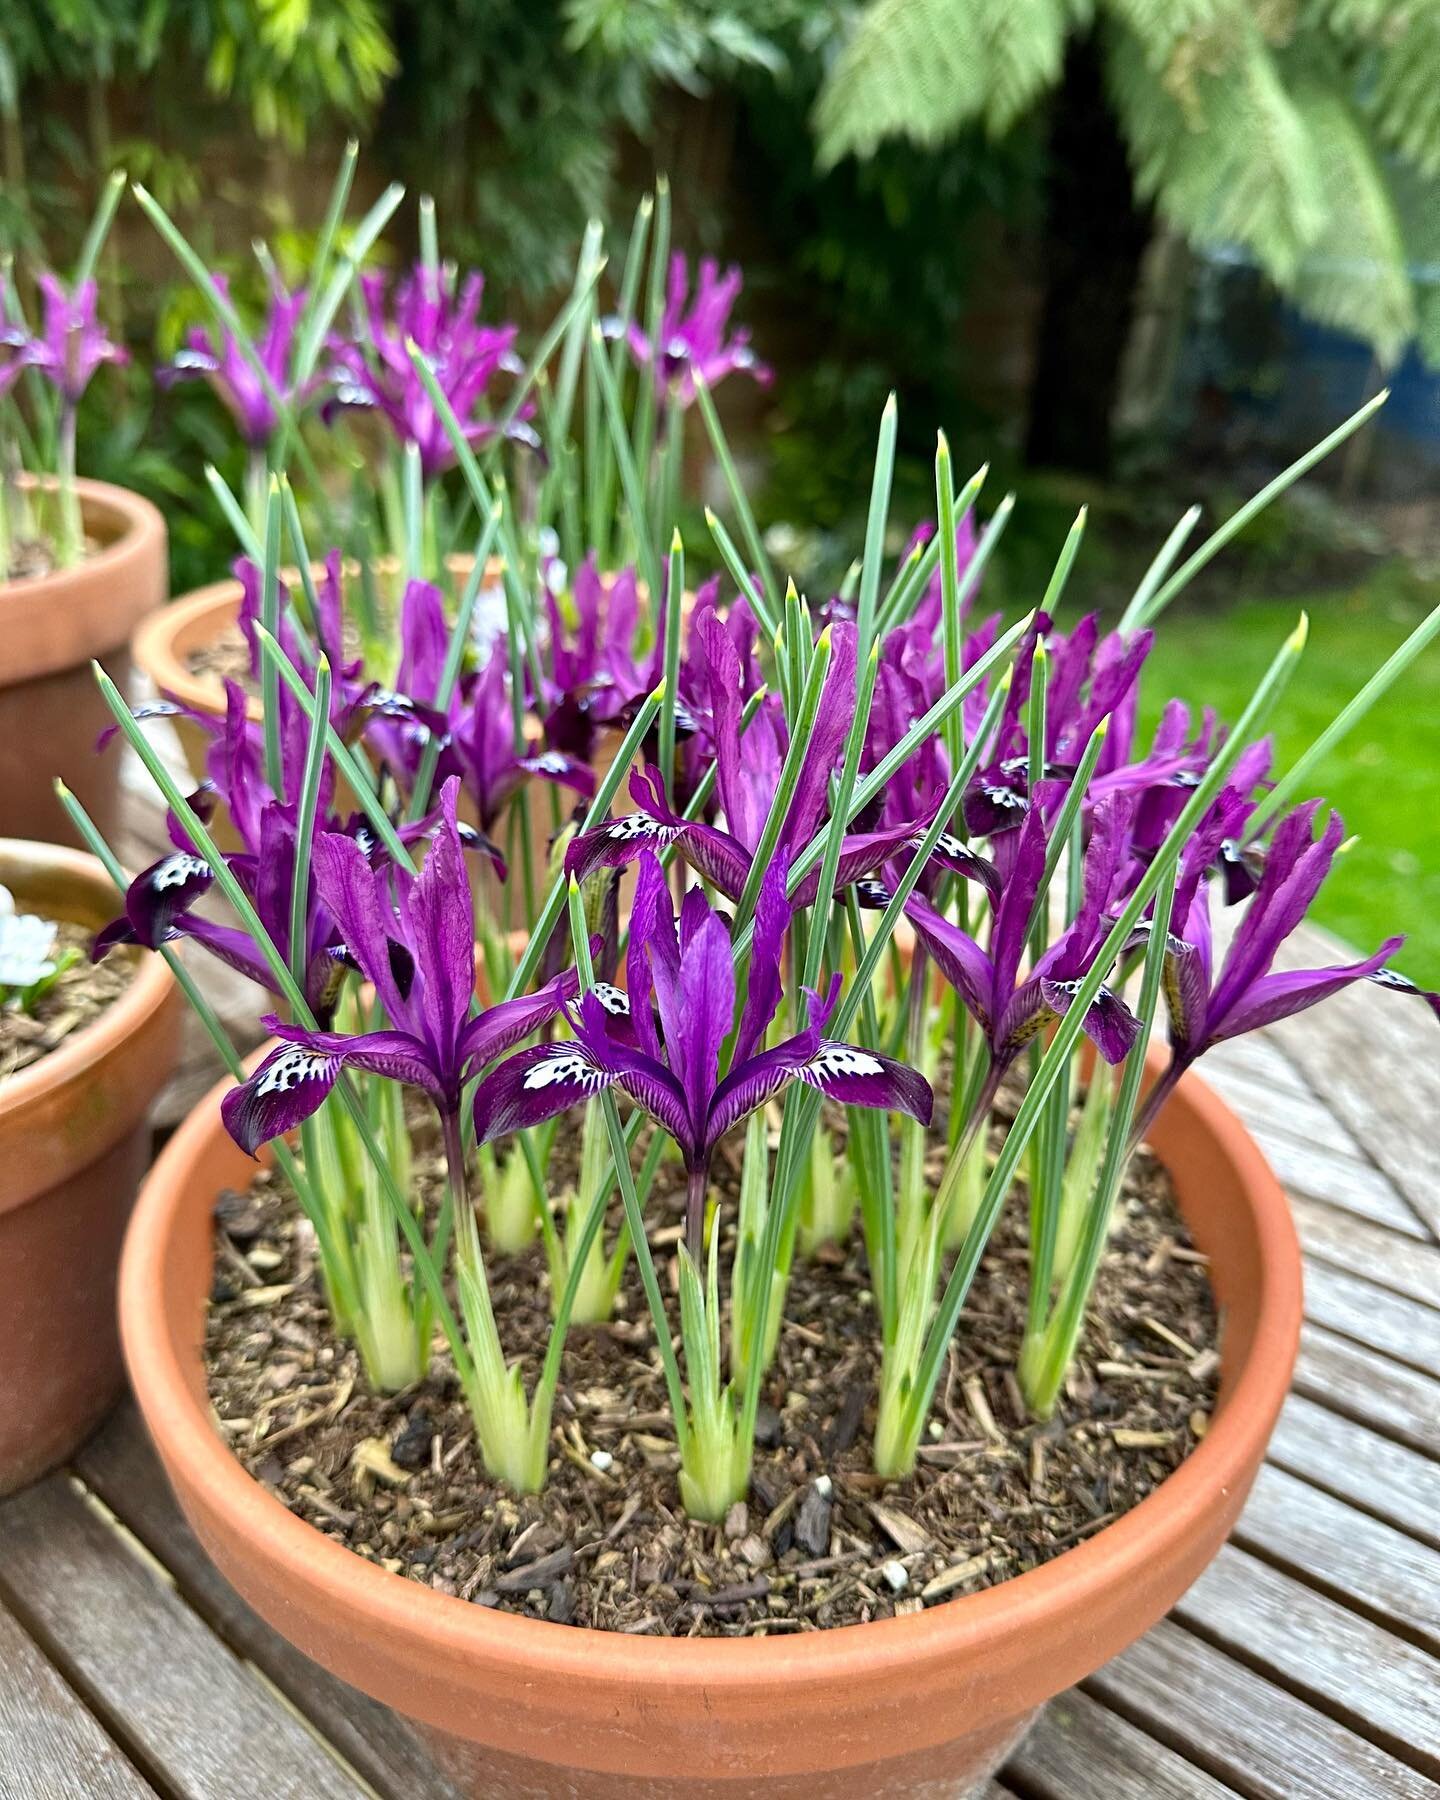 Beginning to think about my bulb order for this year, and thinking about growing these Iris reticulata &lsquo;Harmony&rsquo; from @sarahravensgarden again. What do you think? What bulbs do you have your eye on?